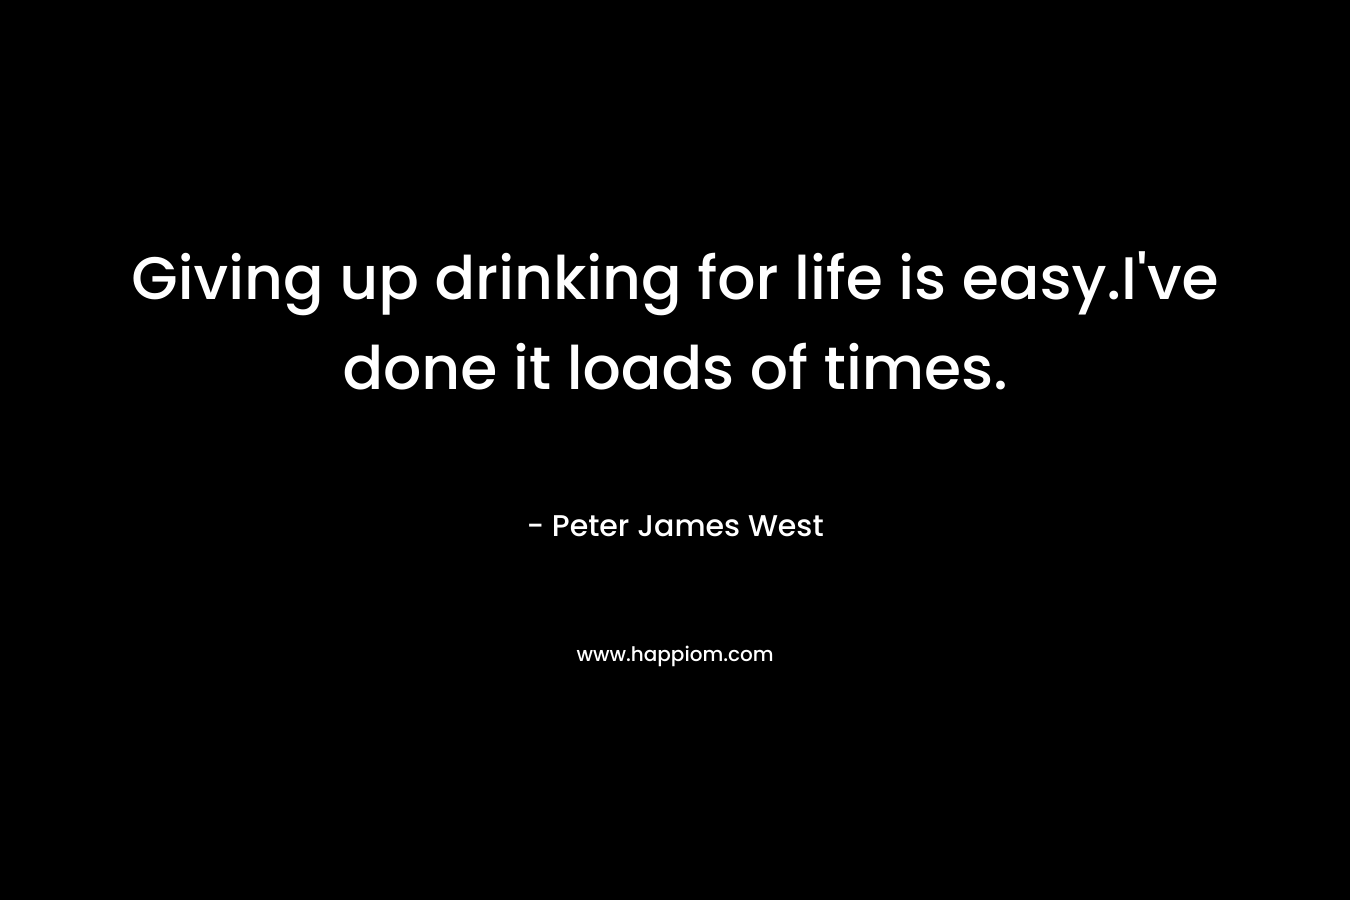 Giving up drinking for life is easy.I've done it loads of times.